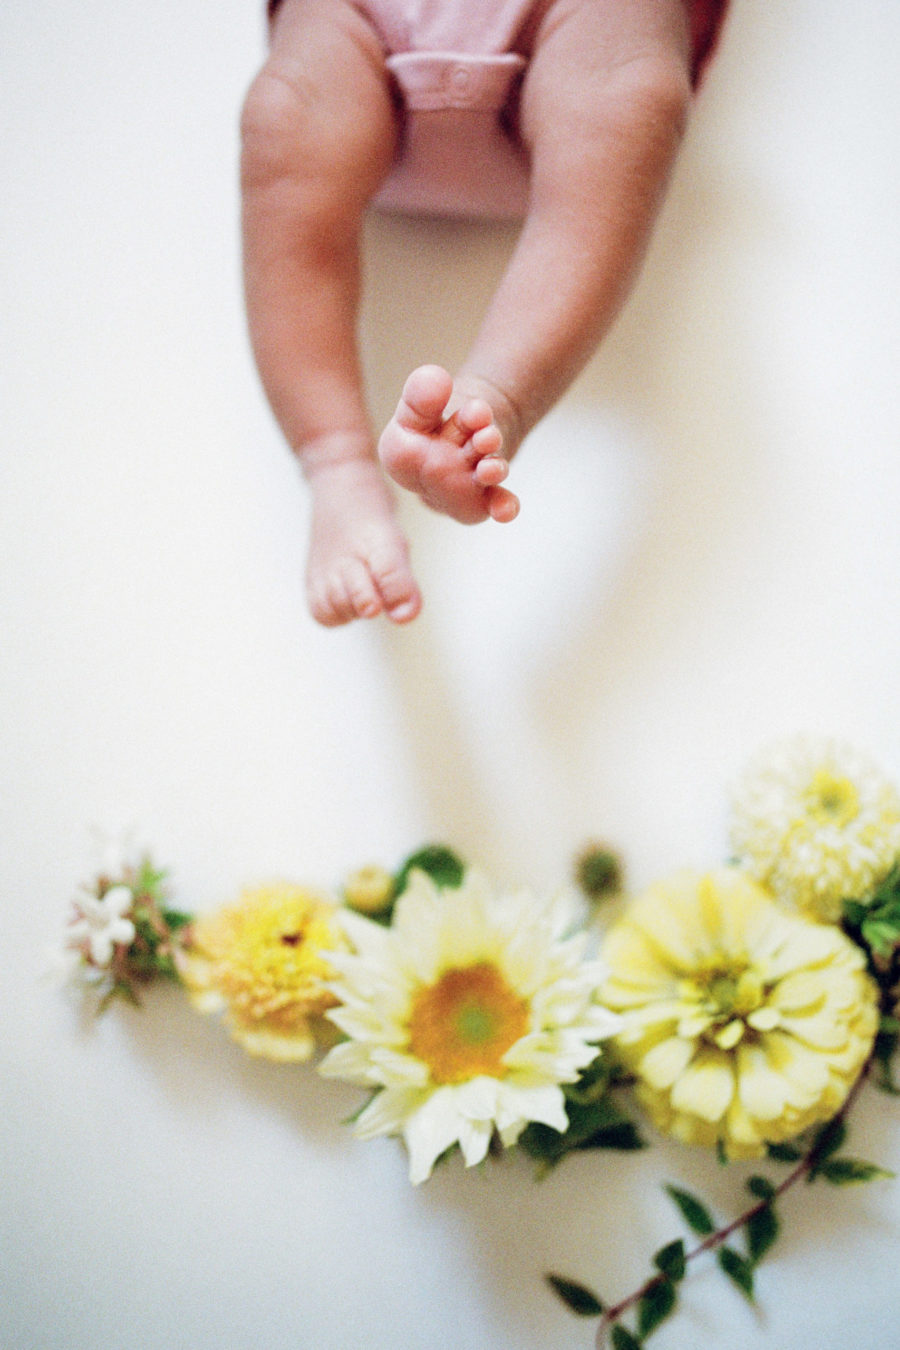 newborn baby toes and floral arrangement